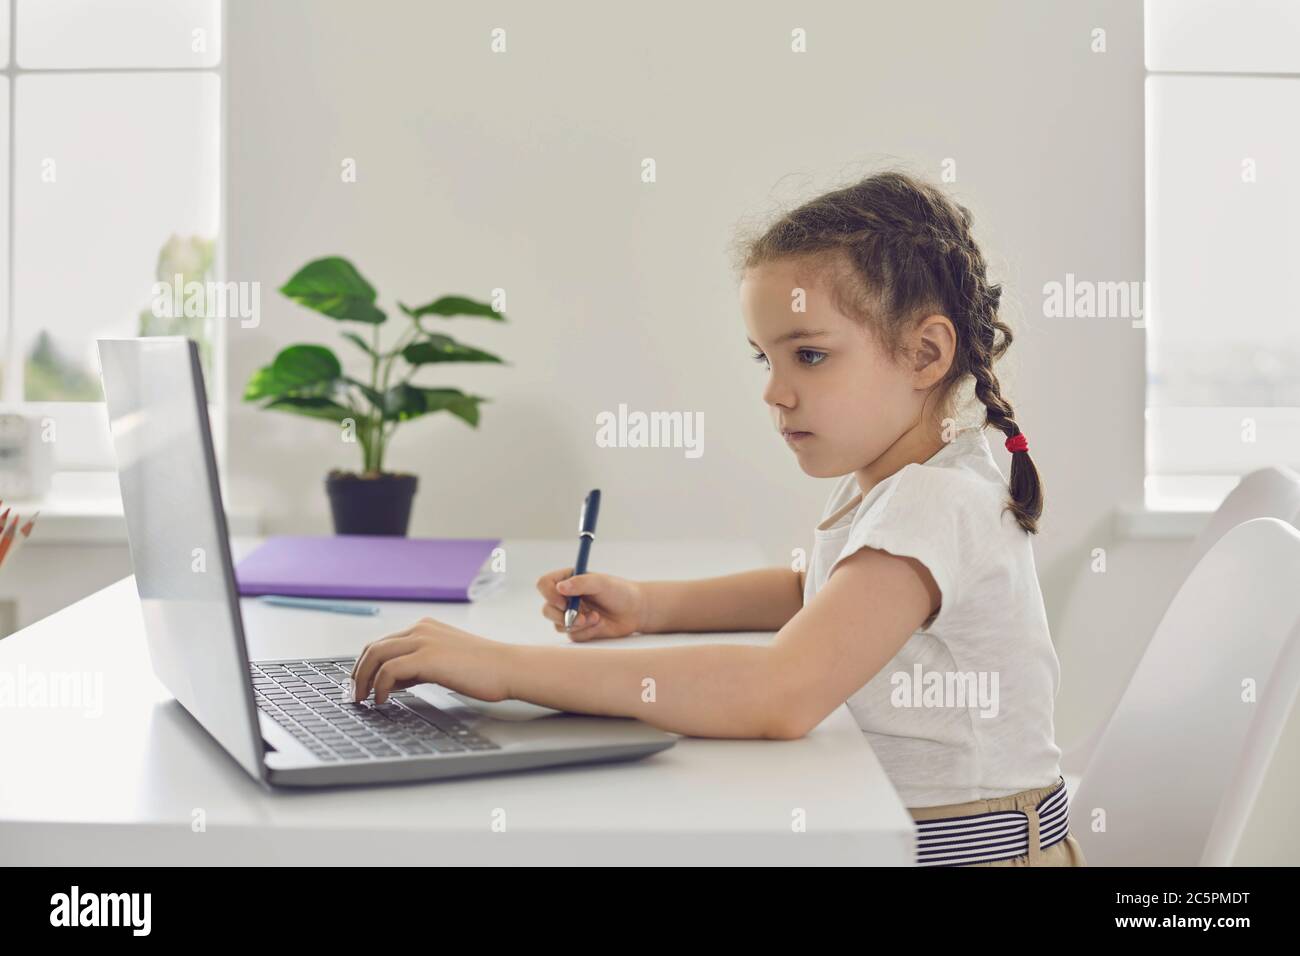 Online learning. Remote school for children. A little girl uses a laptop video lesson while sitting at a table in the room. Stock Photo